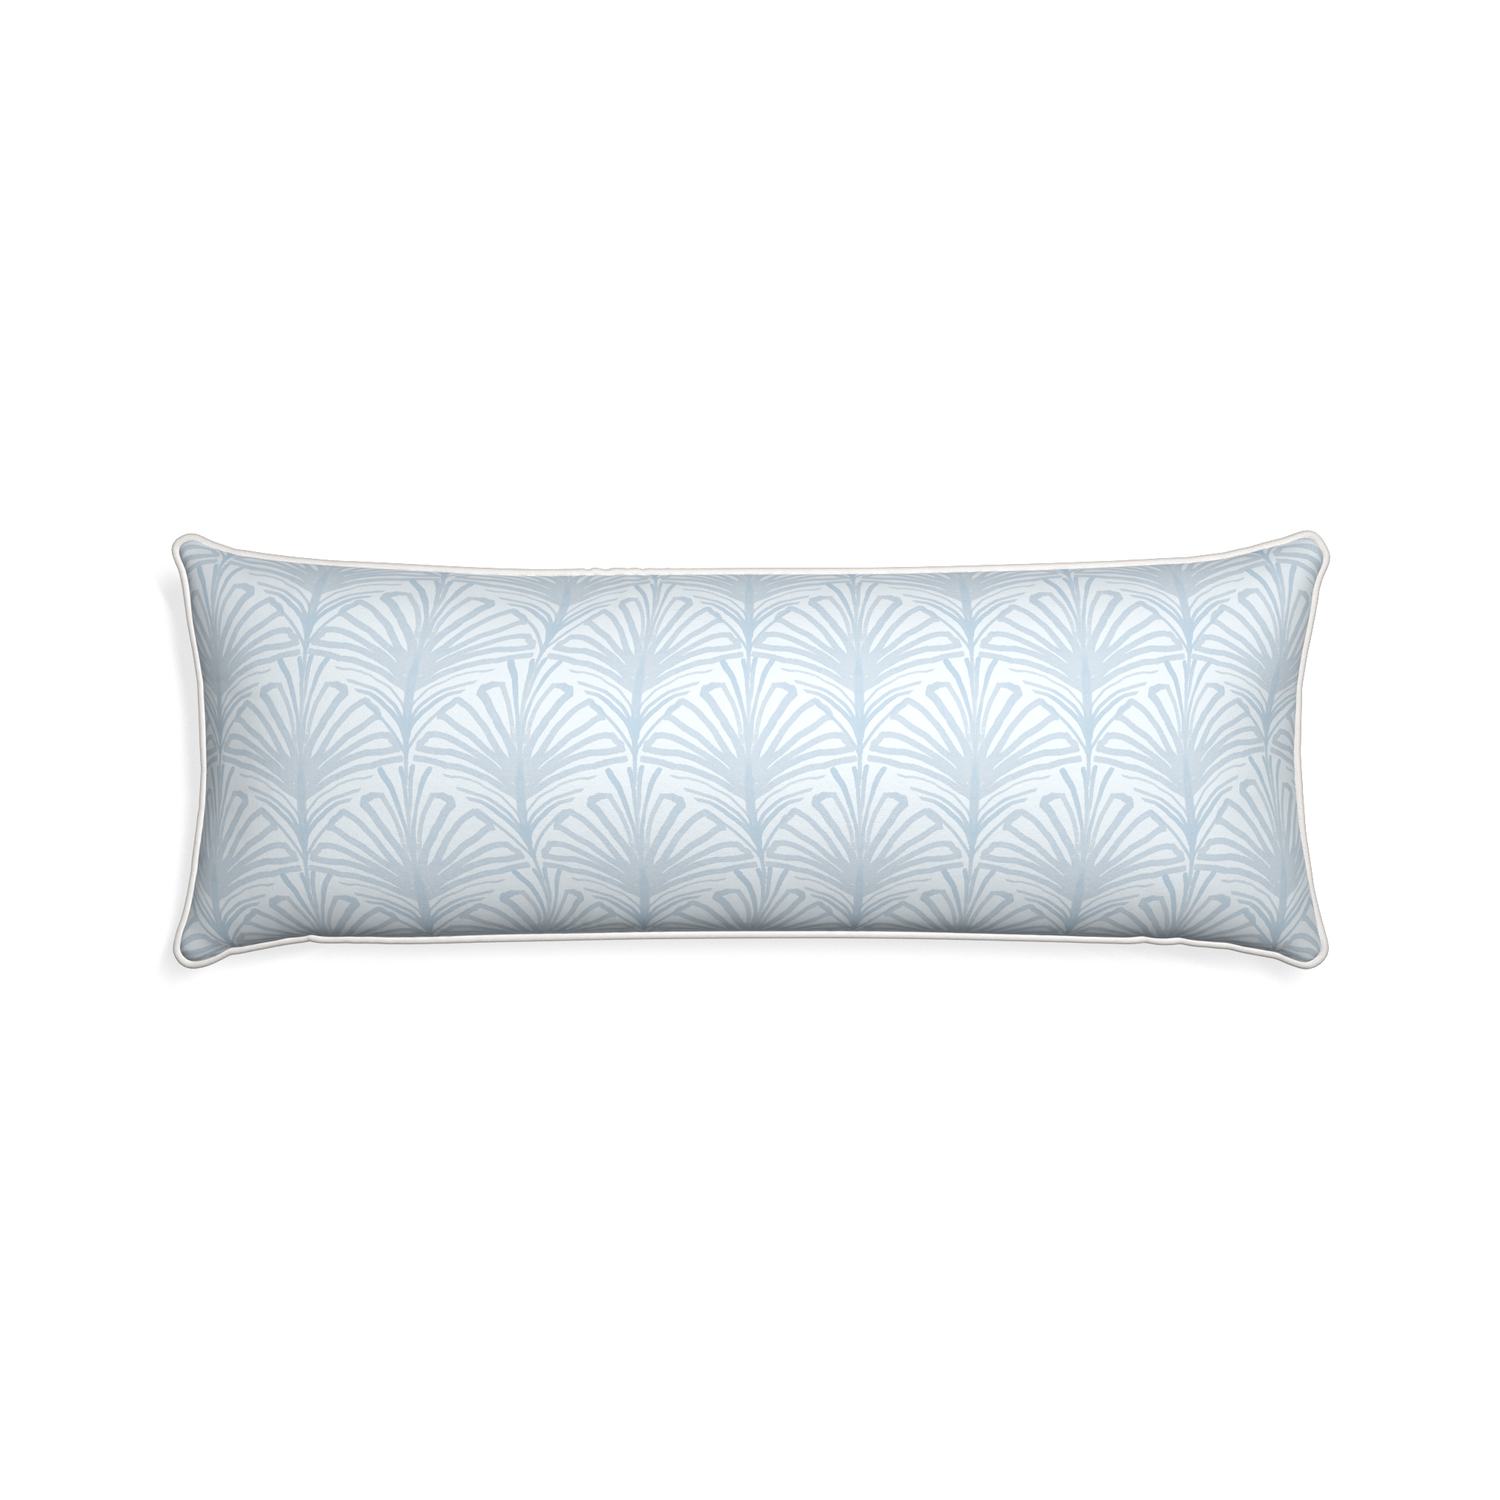 Xl-lumbar suzy sky custom sky blue palmpillow with snow piping on white background